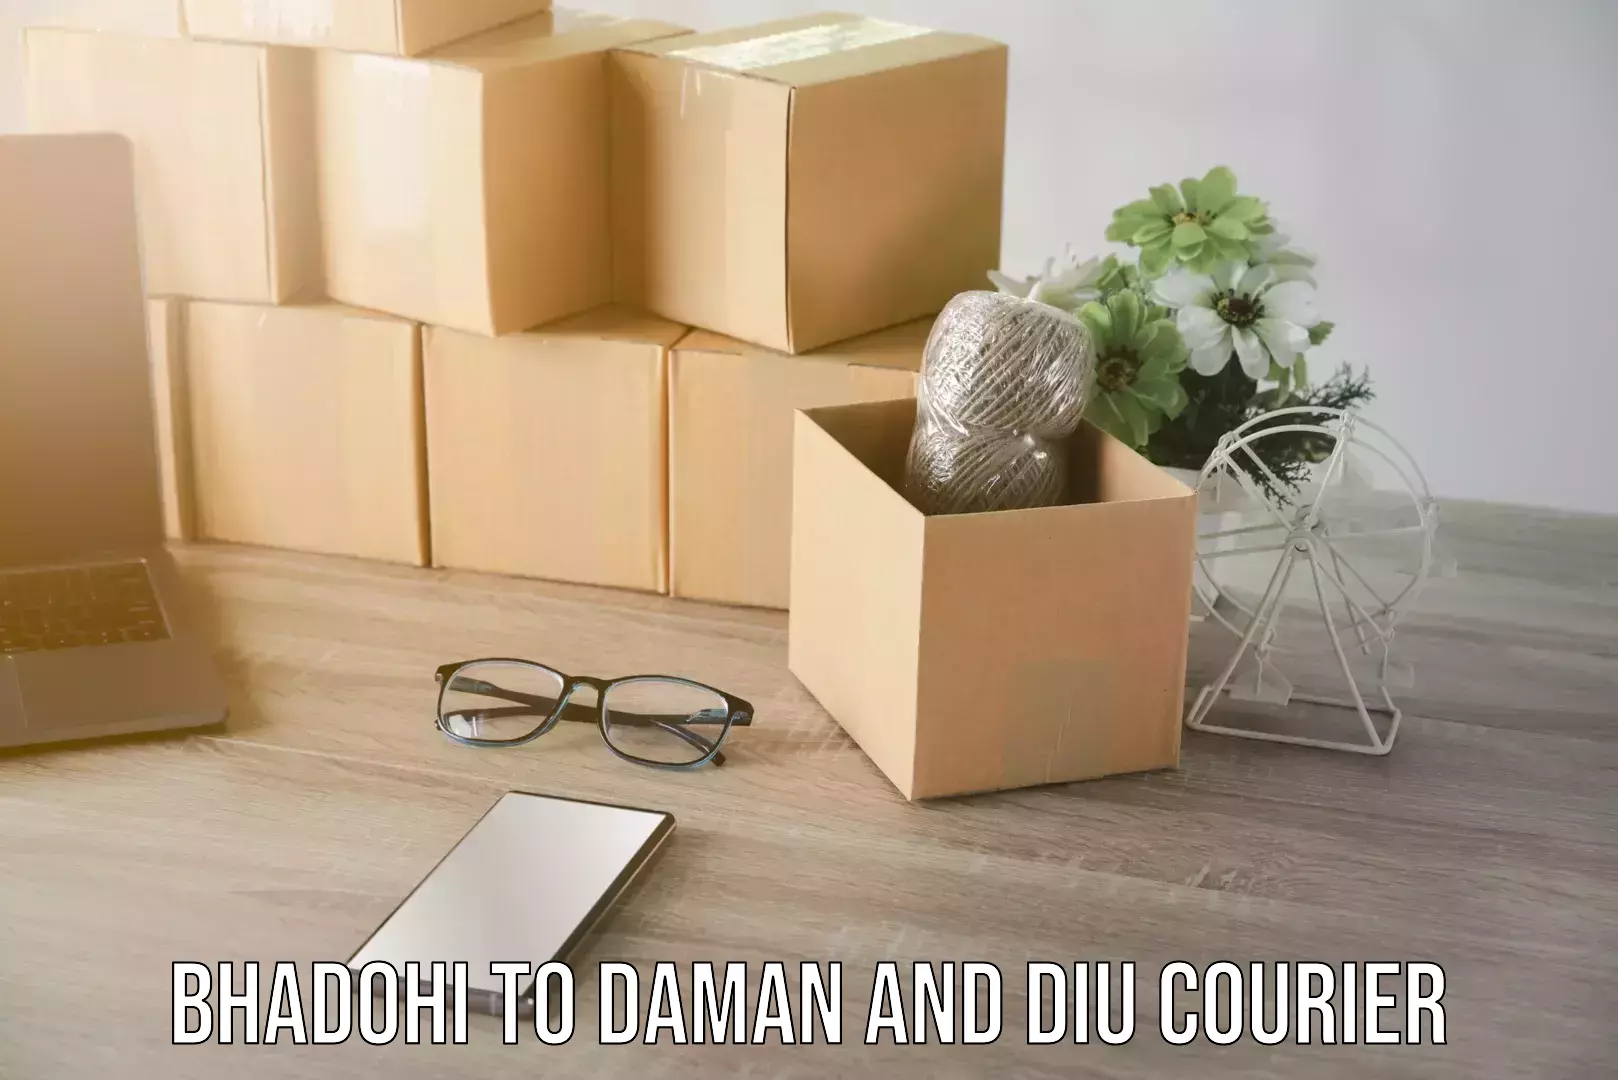 Global courier networks Bhadohi to Daman and Diu